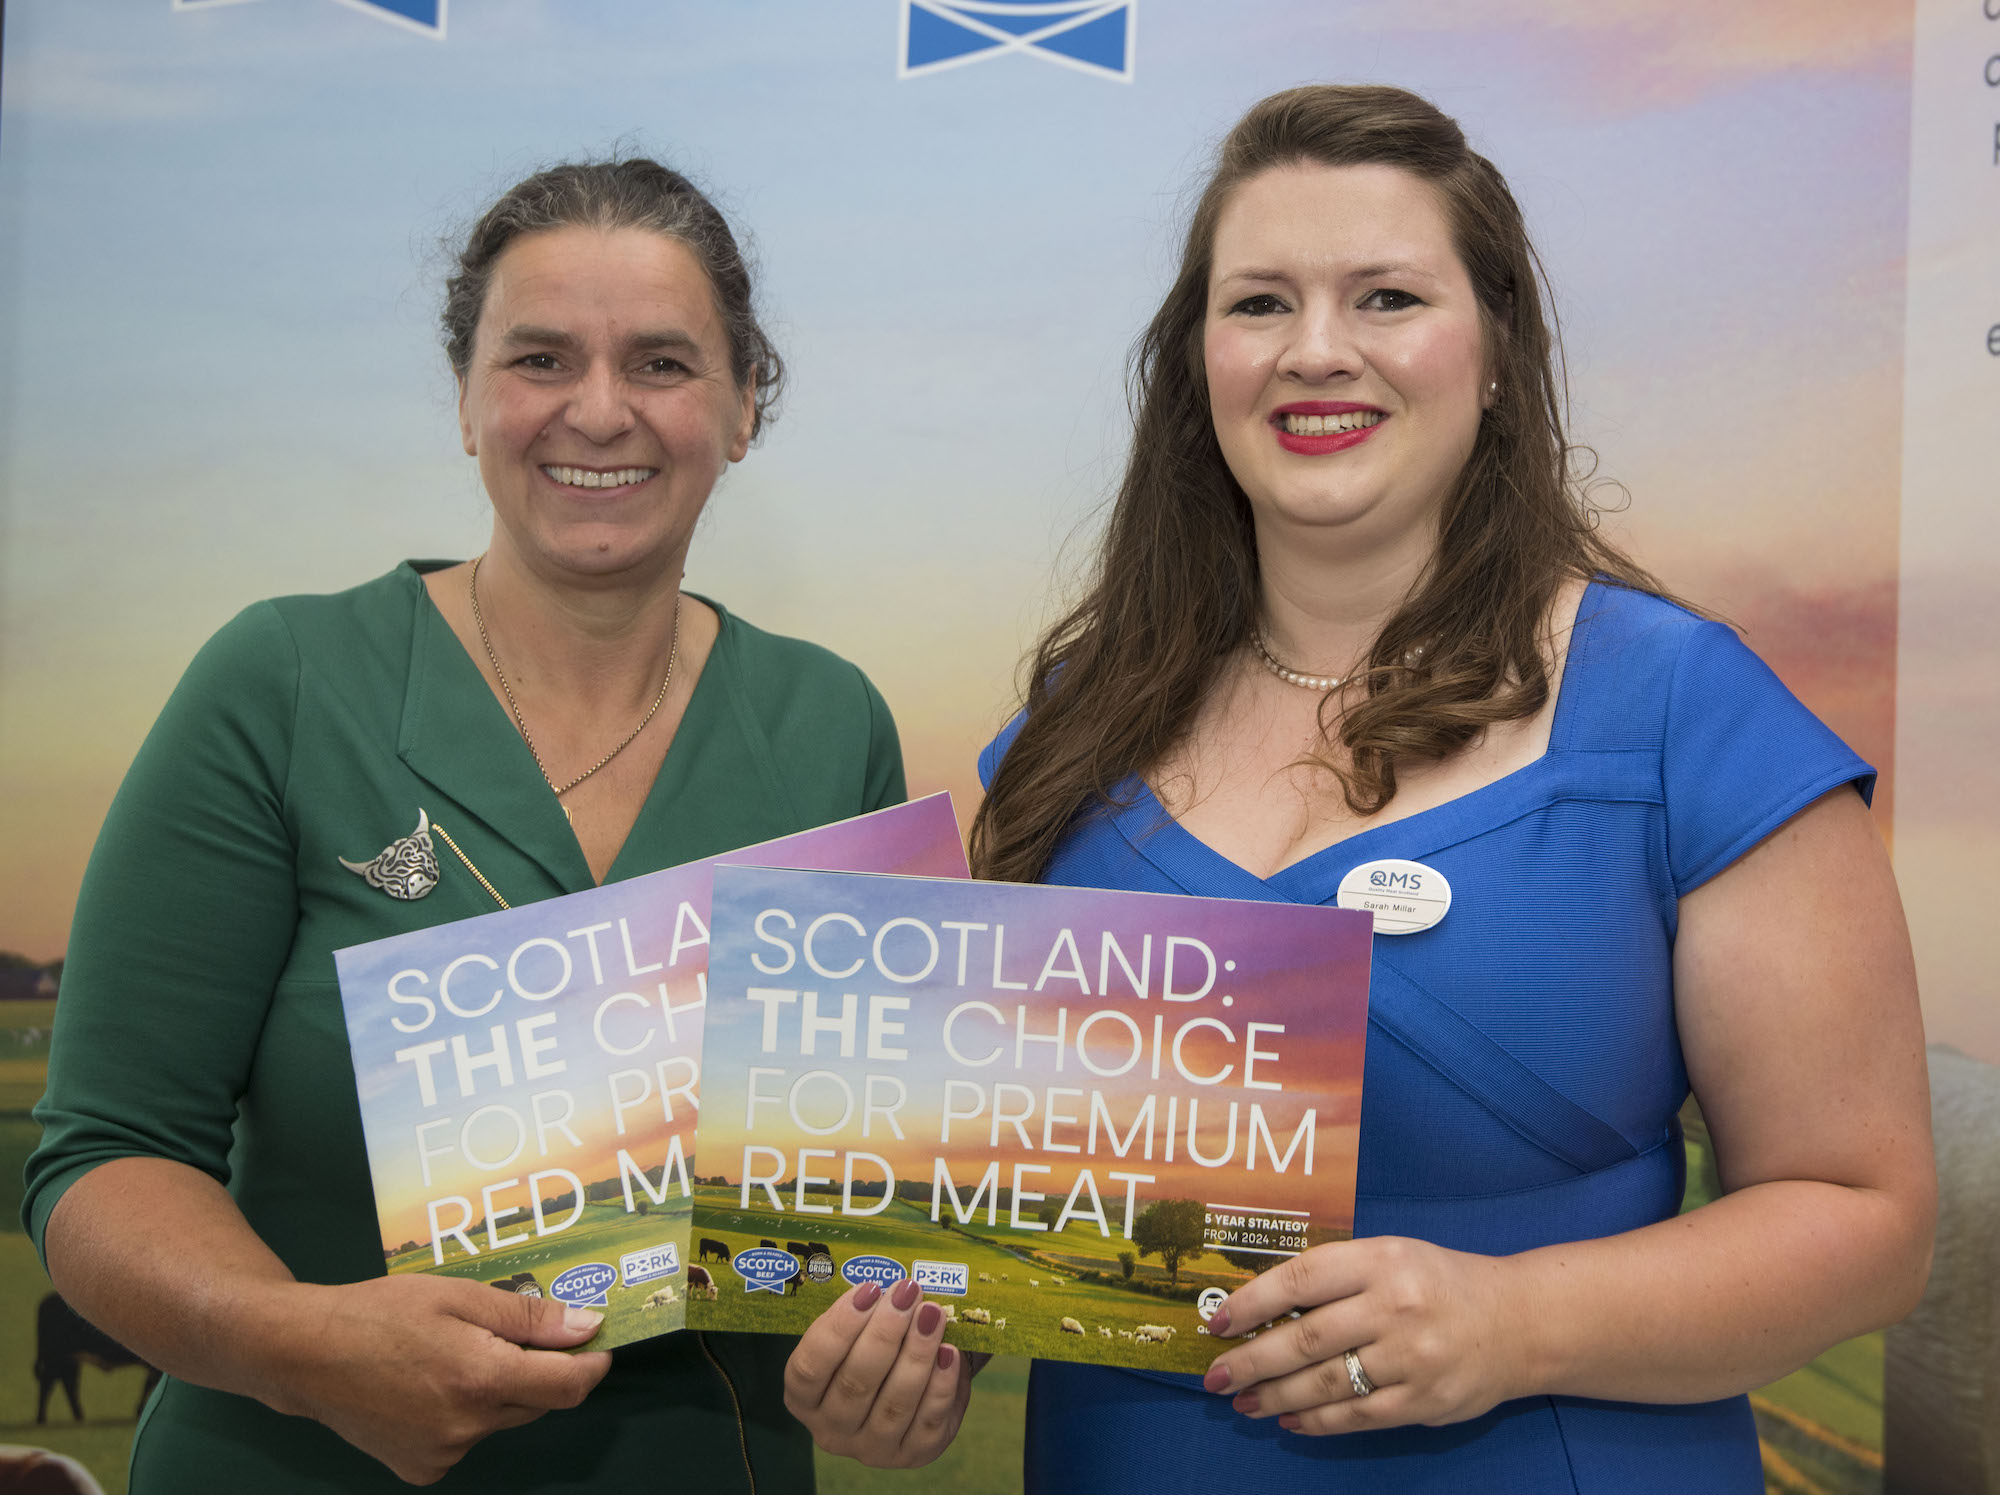 QMS unveils ambitious five-year strategy to make Scotland a global leader in premium red meat